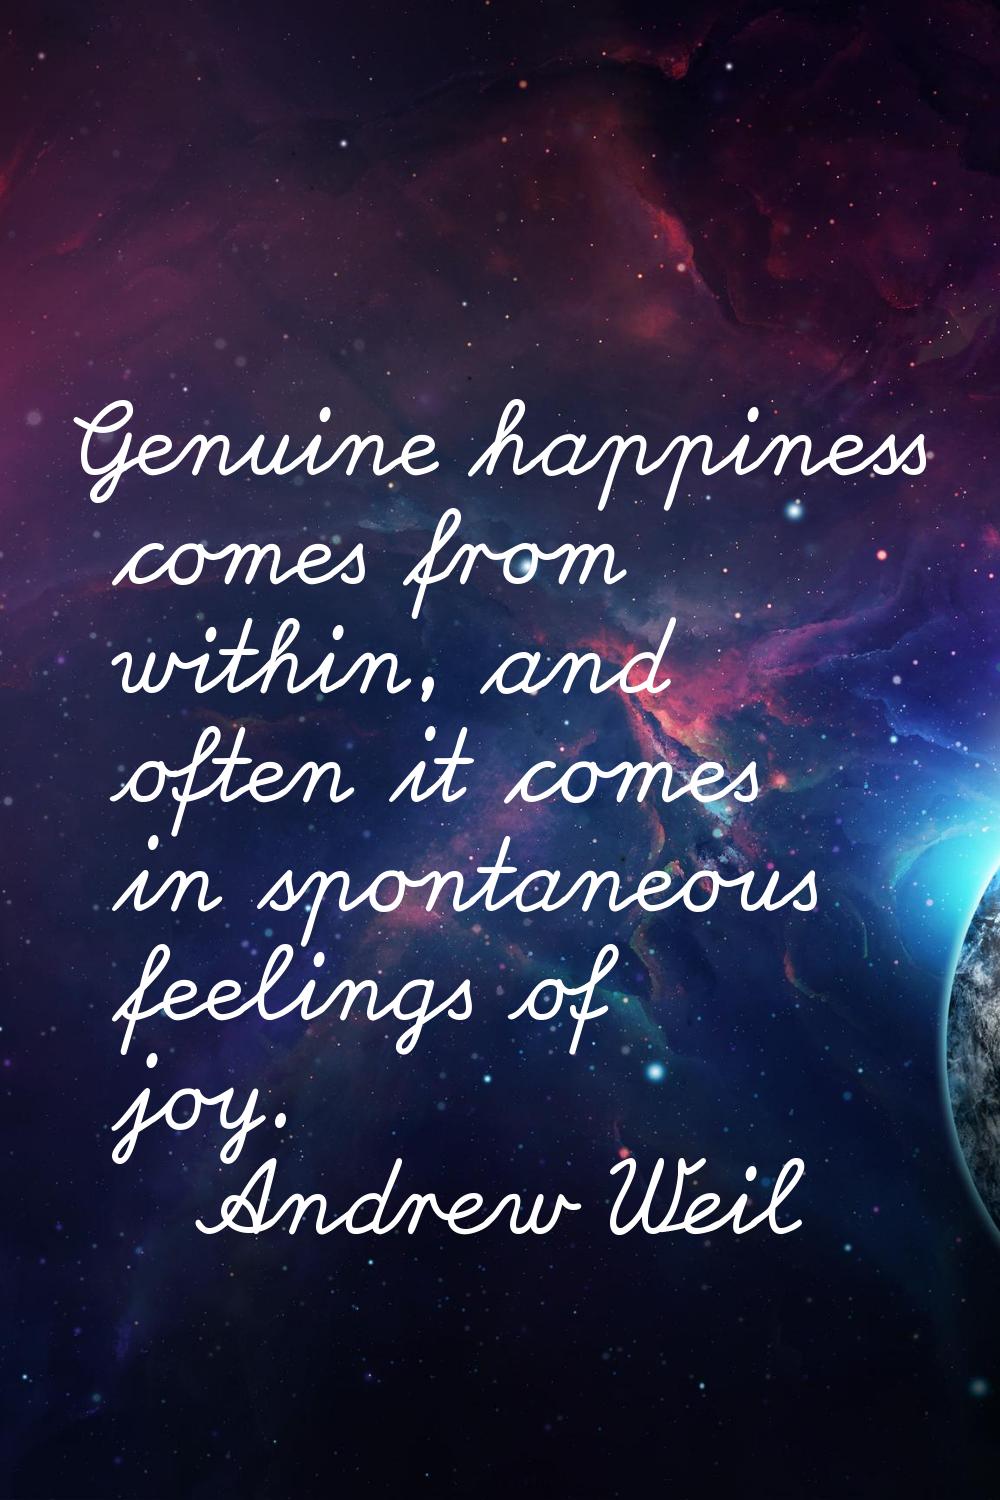 Genuine happiness comes from within, and often it comes in spontaneous feelings of joy.